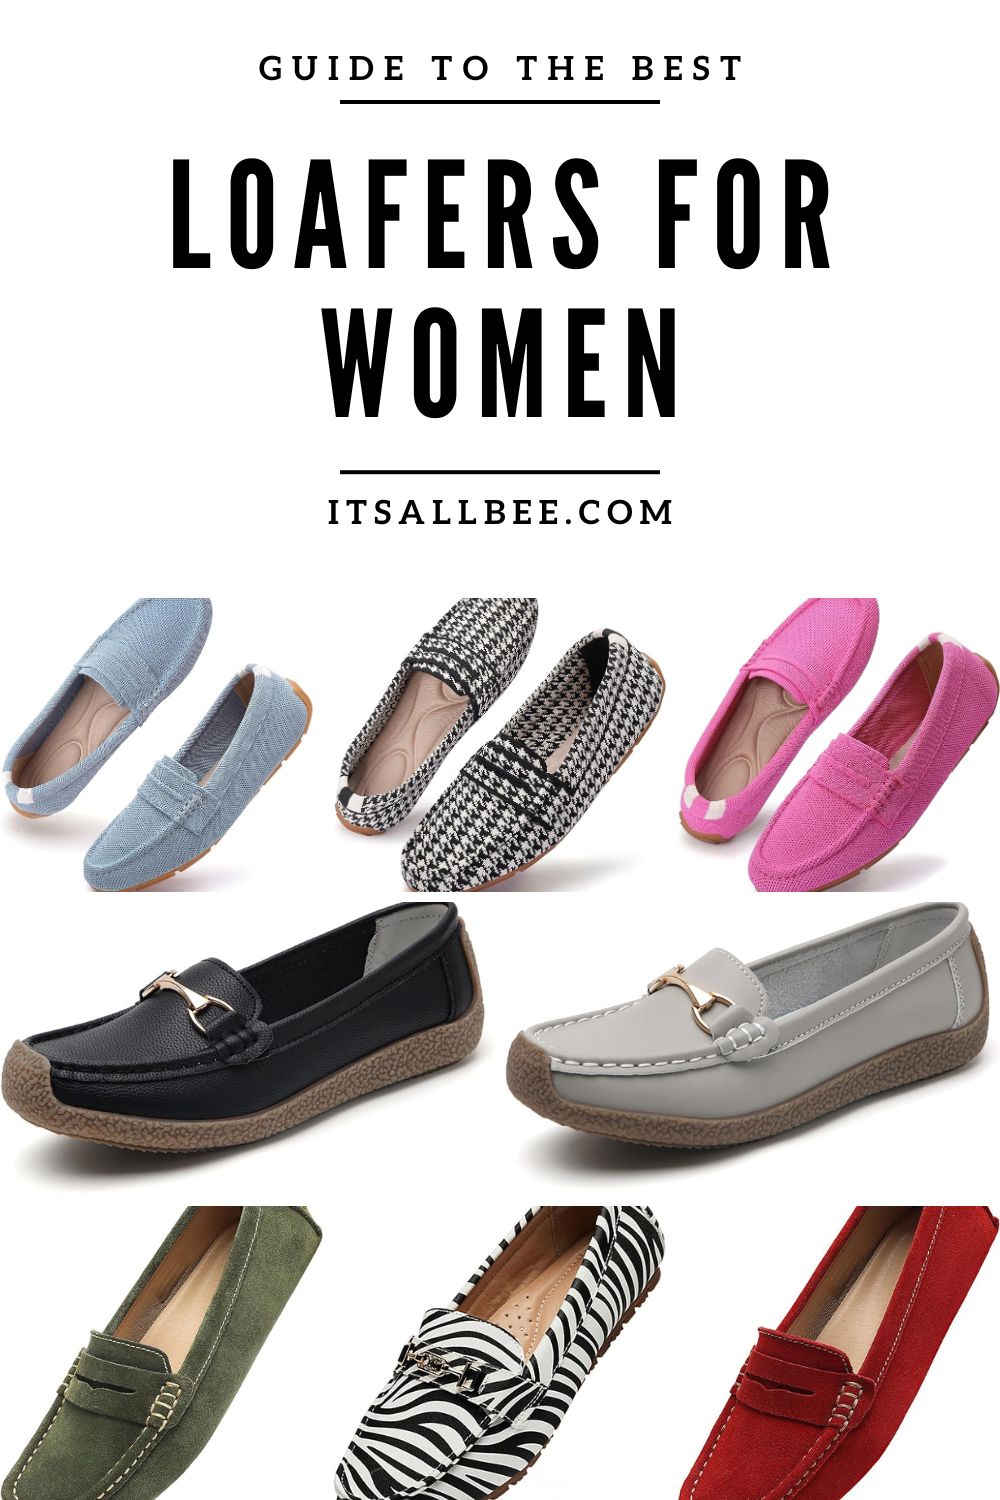 The Best Loafers For Women On Amazon Perfect For Travel Or Work ...